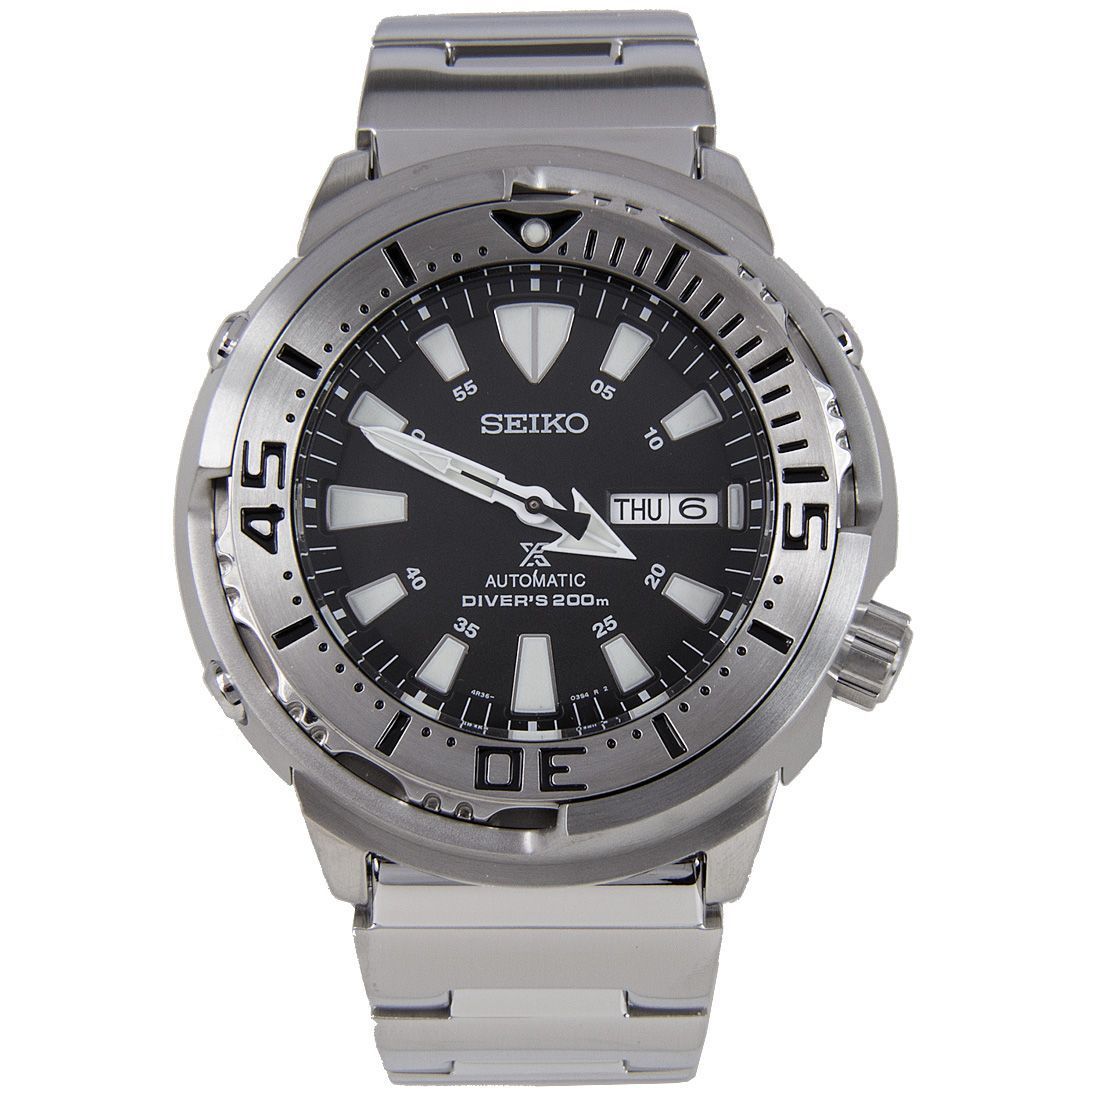 Seiko Prospex Automatic Diver's Mens Watch SRP637K SRP637 SRP637K1 